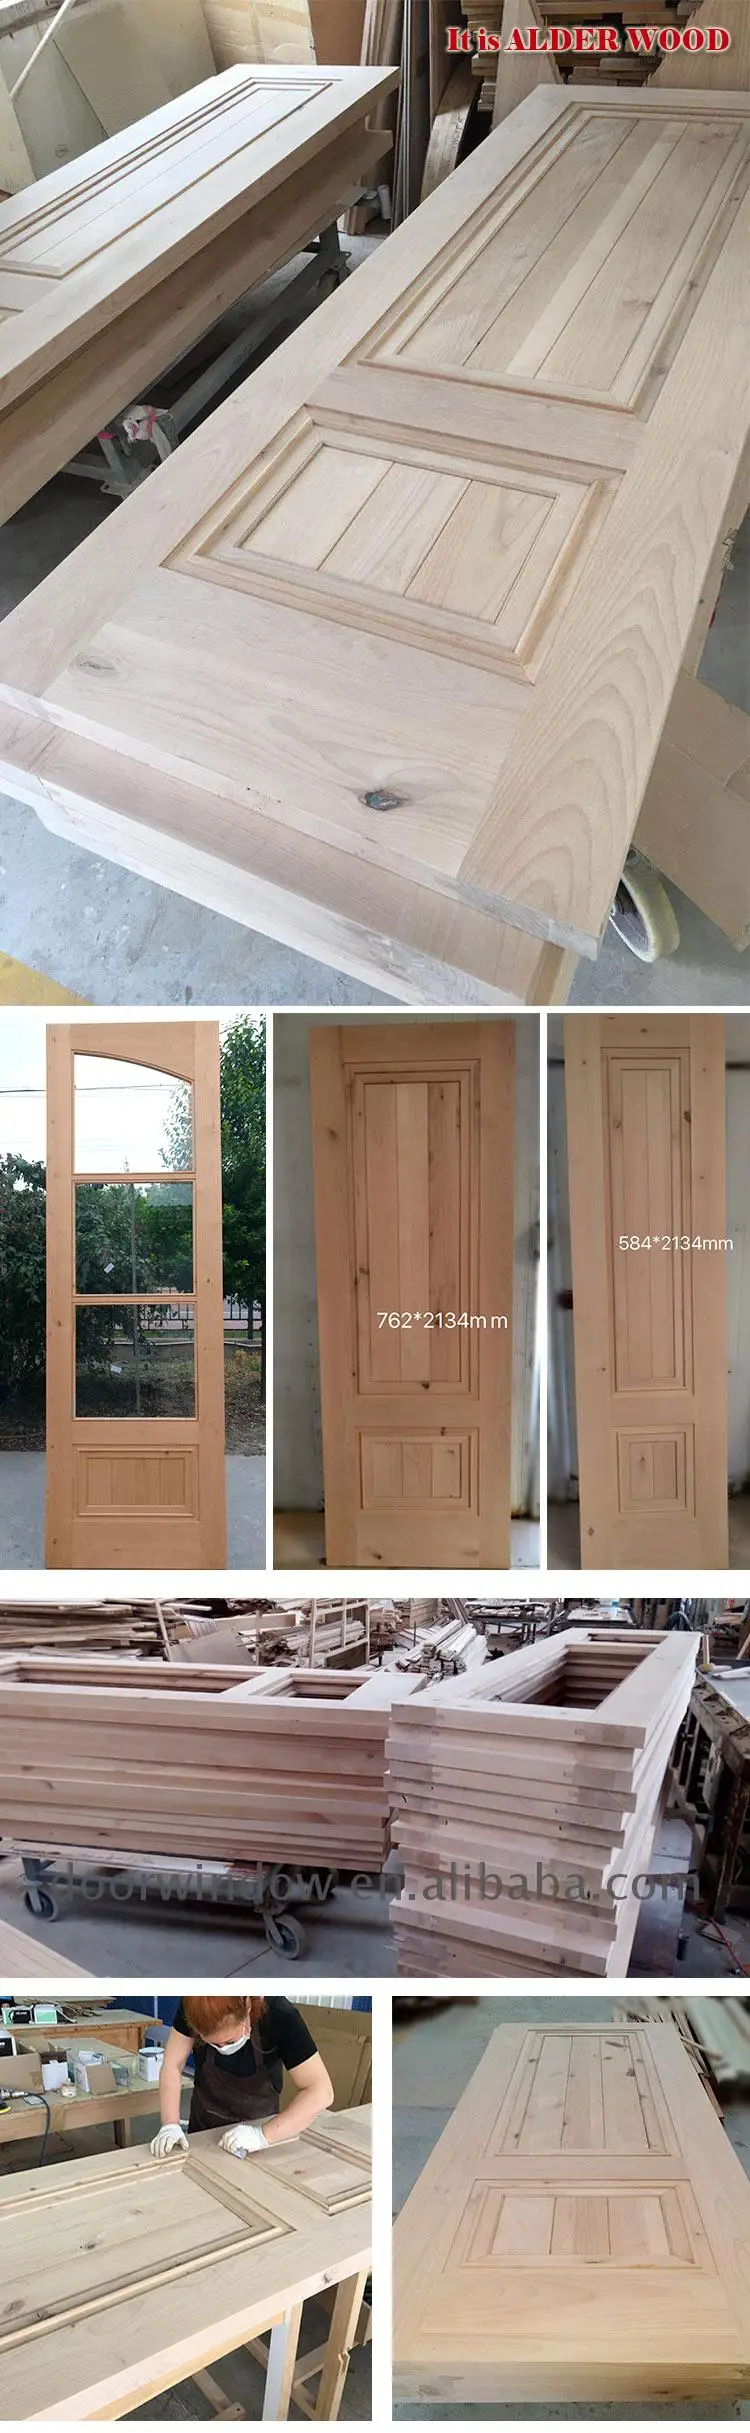 Hot selling modern interior doors with glass frosted door designs